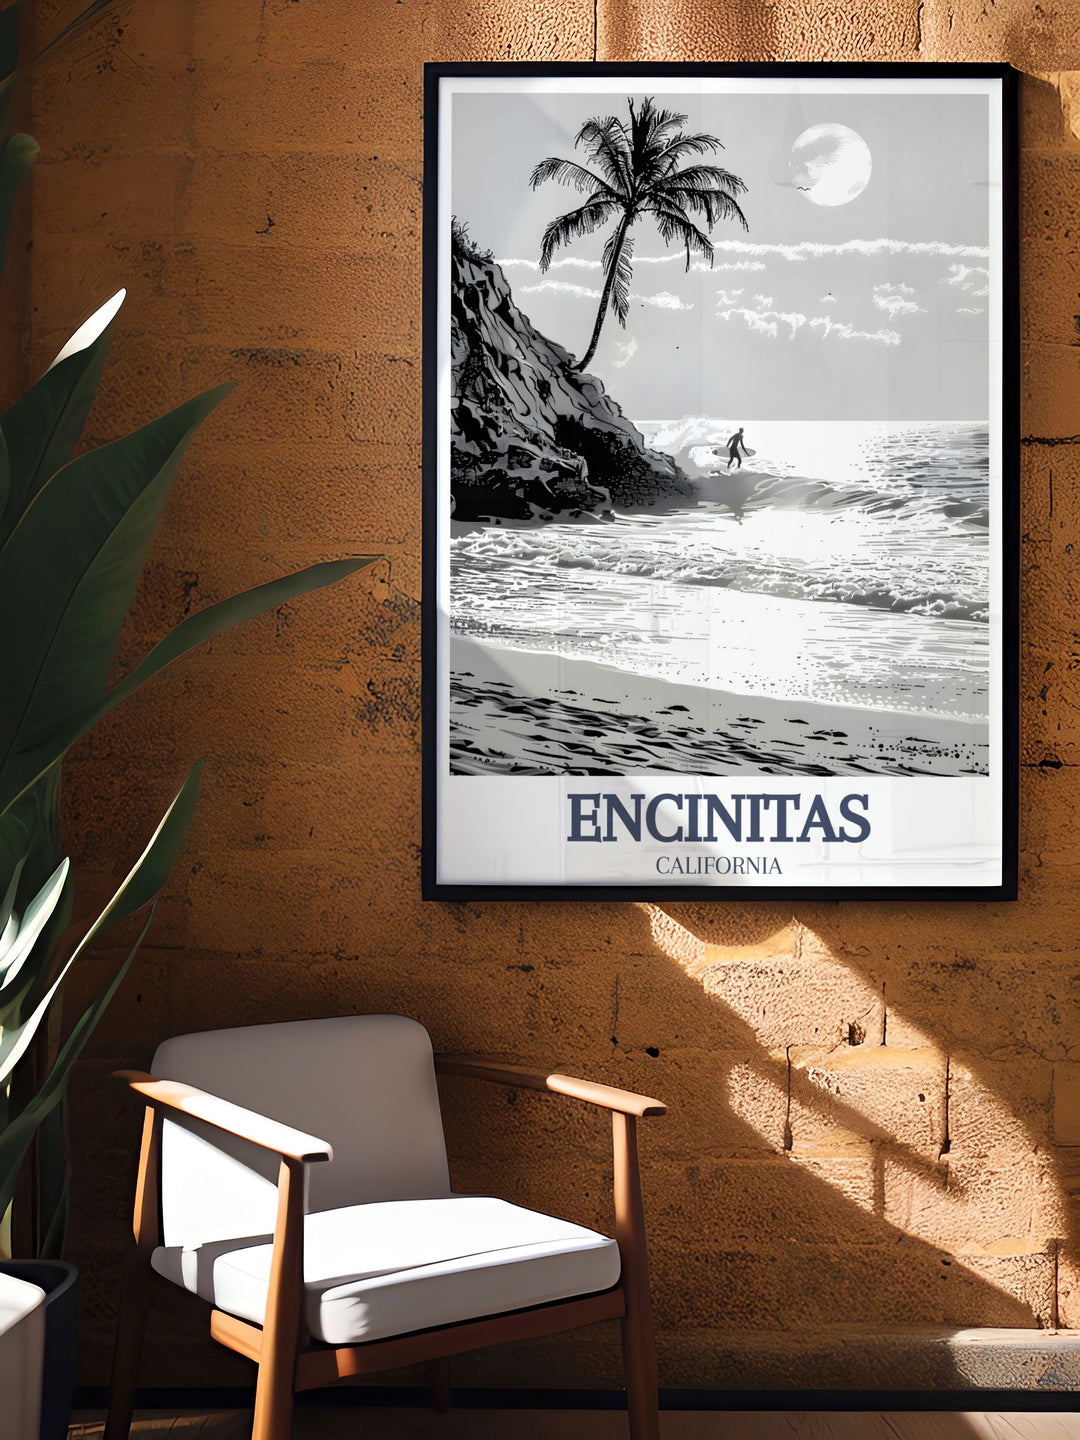 Personalized gift idea with a travel poster print of Moonlight Beach, Swamis Surf Spot perfect for surf enthusiasts and beach lovers Encinitas skyline and beach scenes beautifully depicted in a vintage style